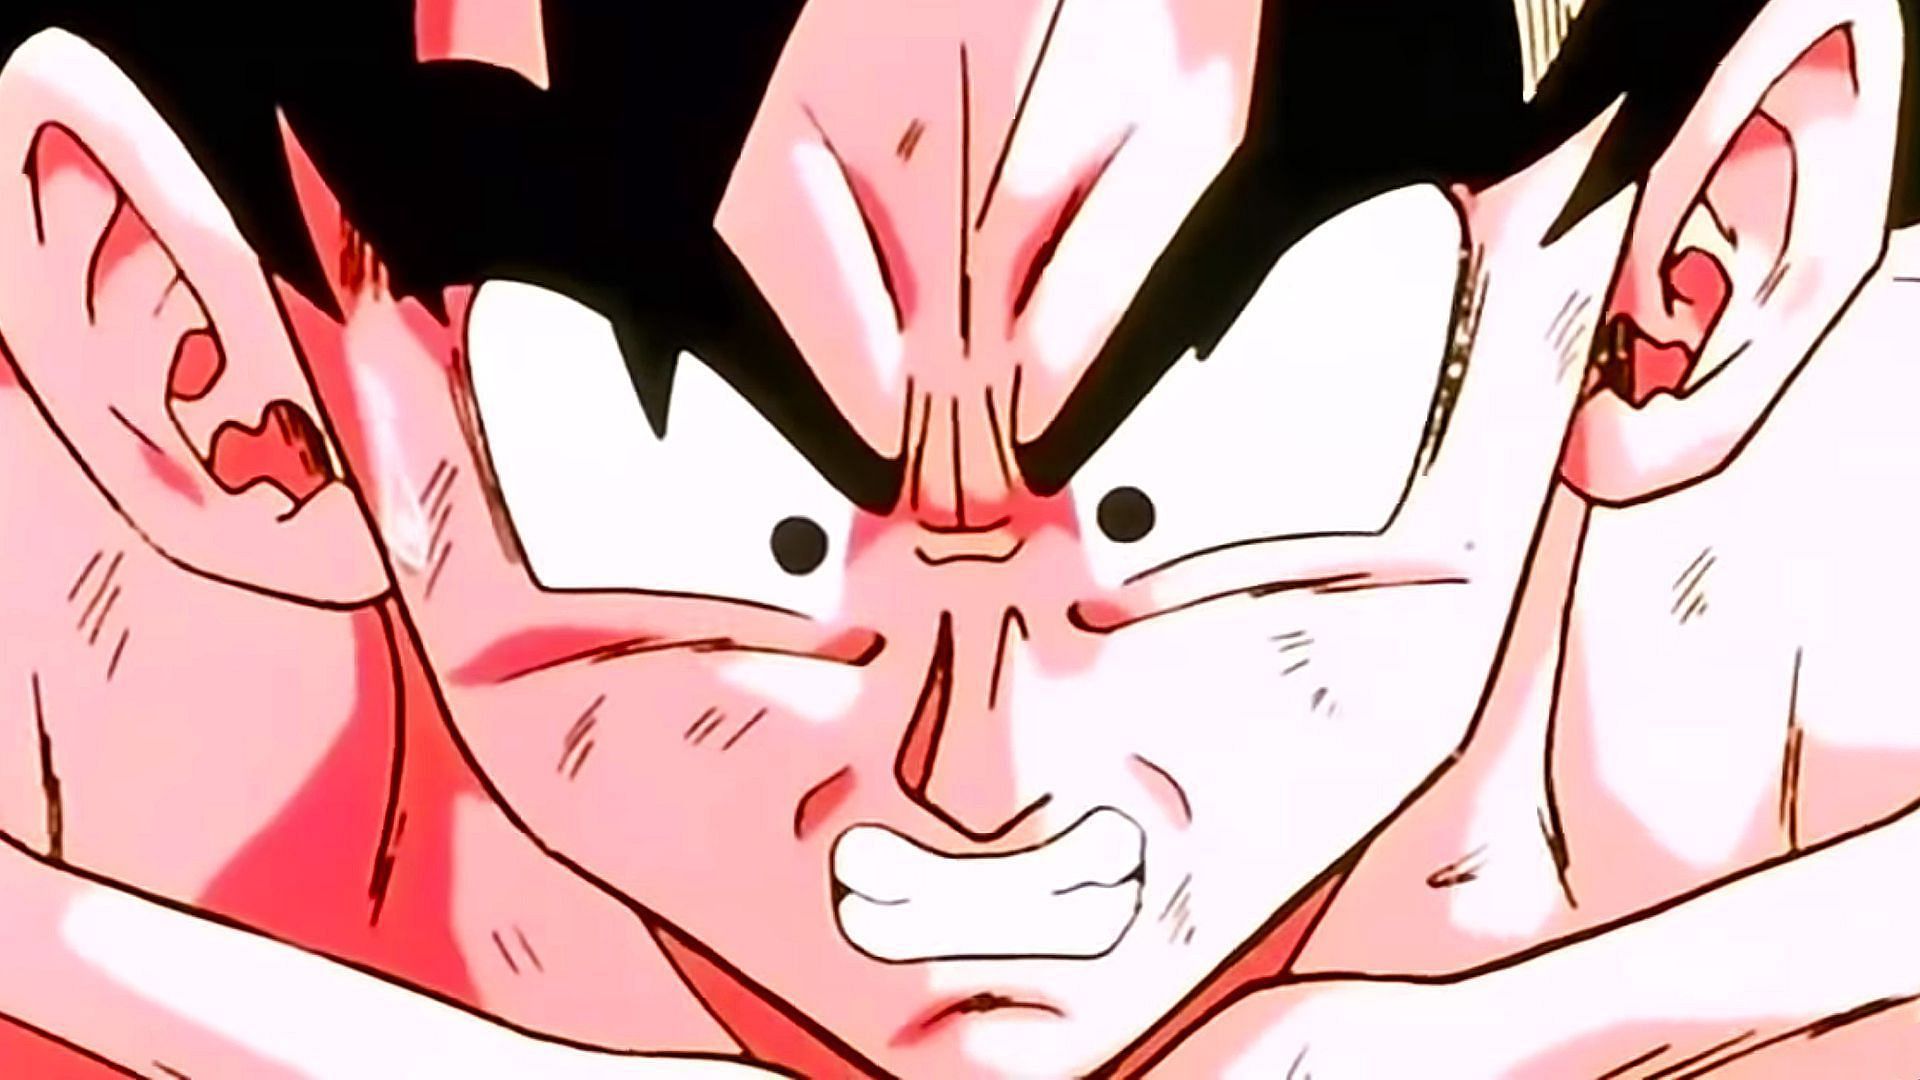 Son Goku, protagonist of Dragon Ball Z, as seen in the series&#039; anime (Image via Toei Animation)